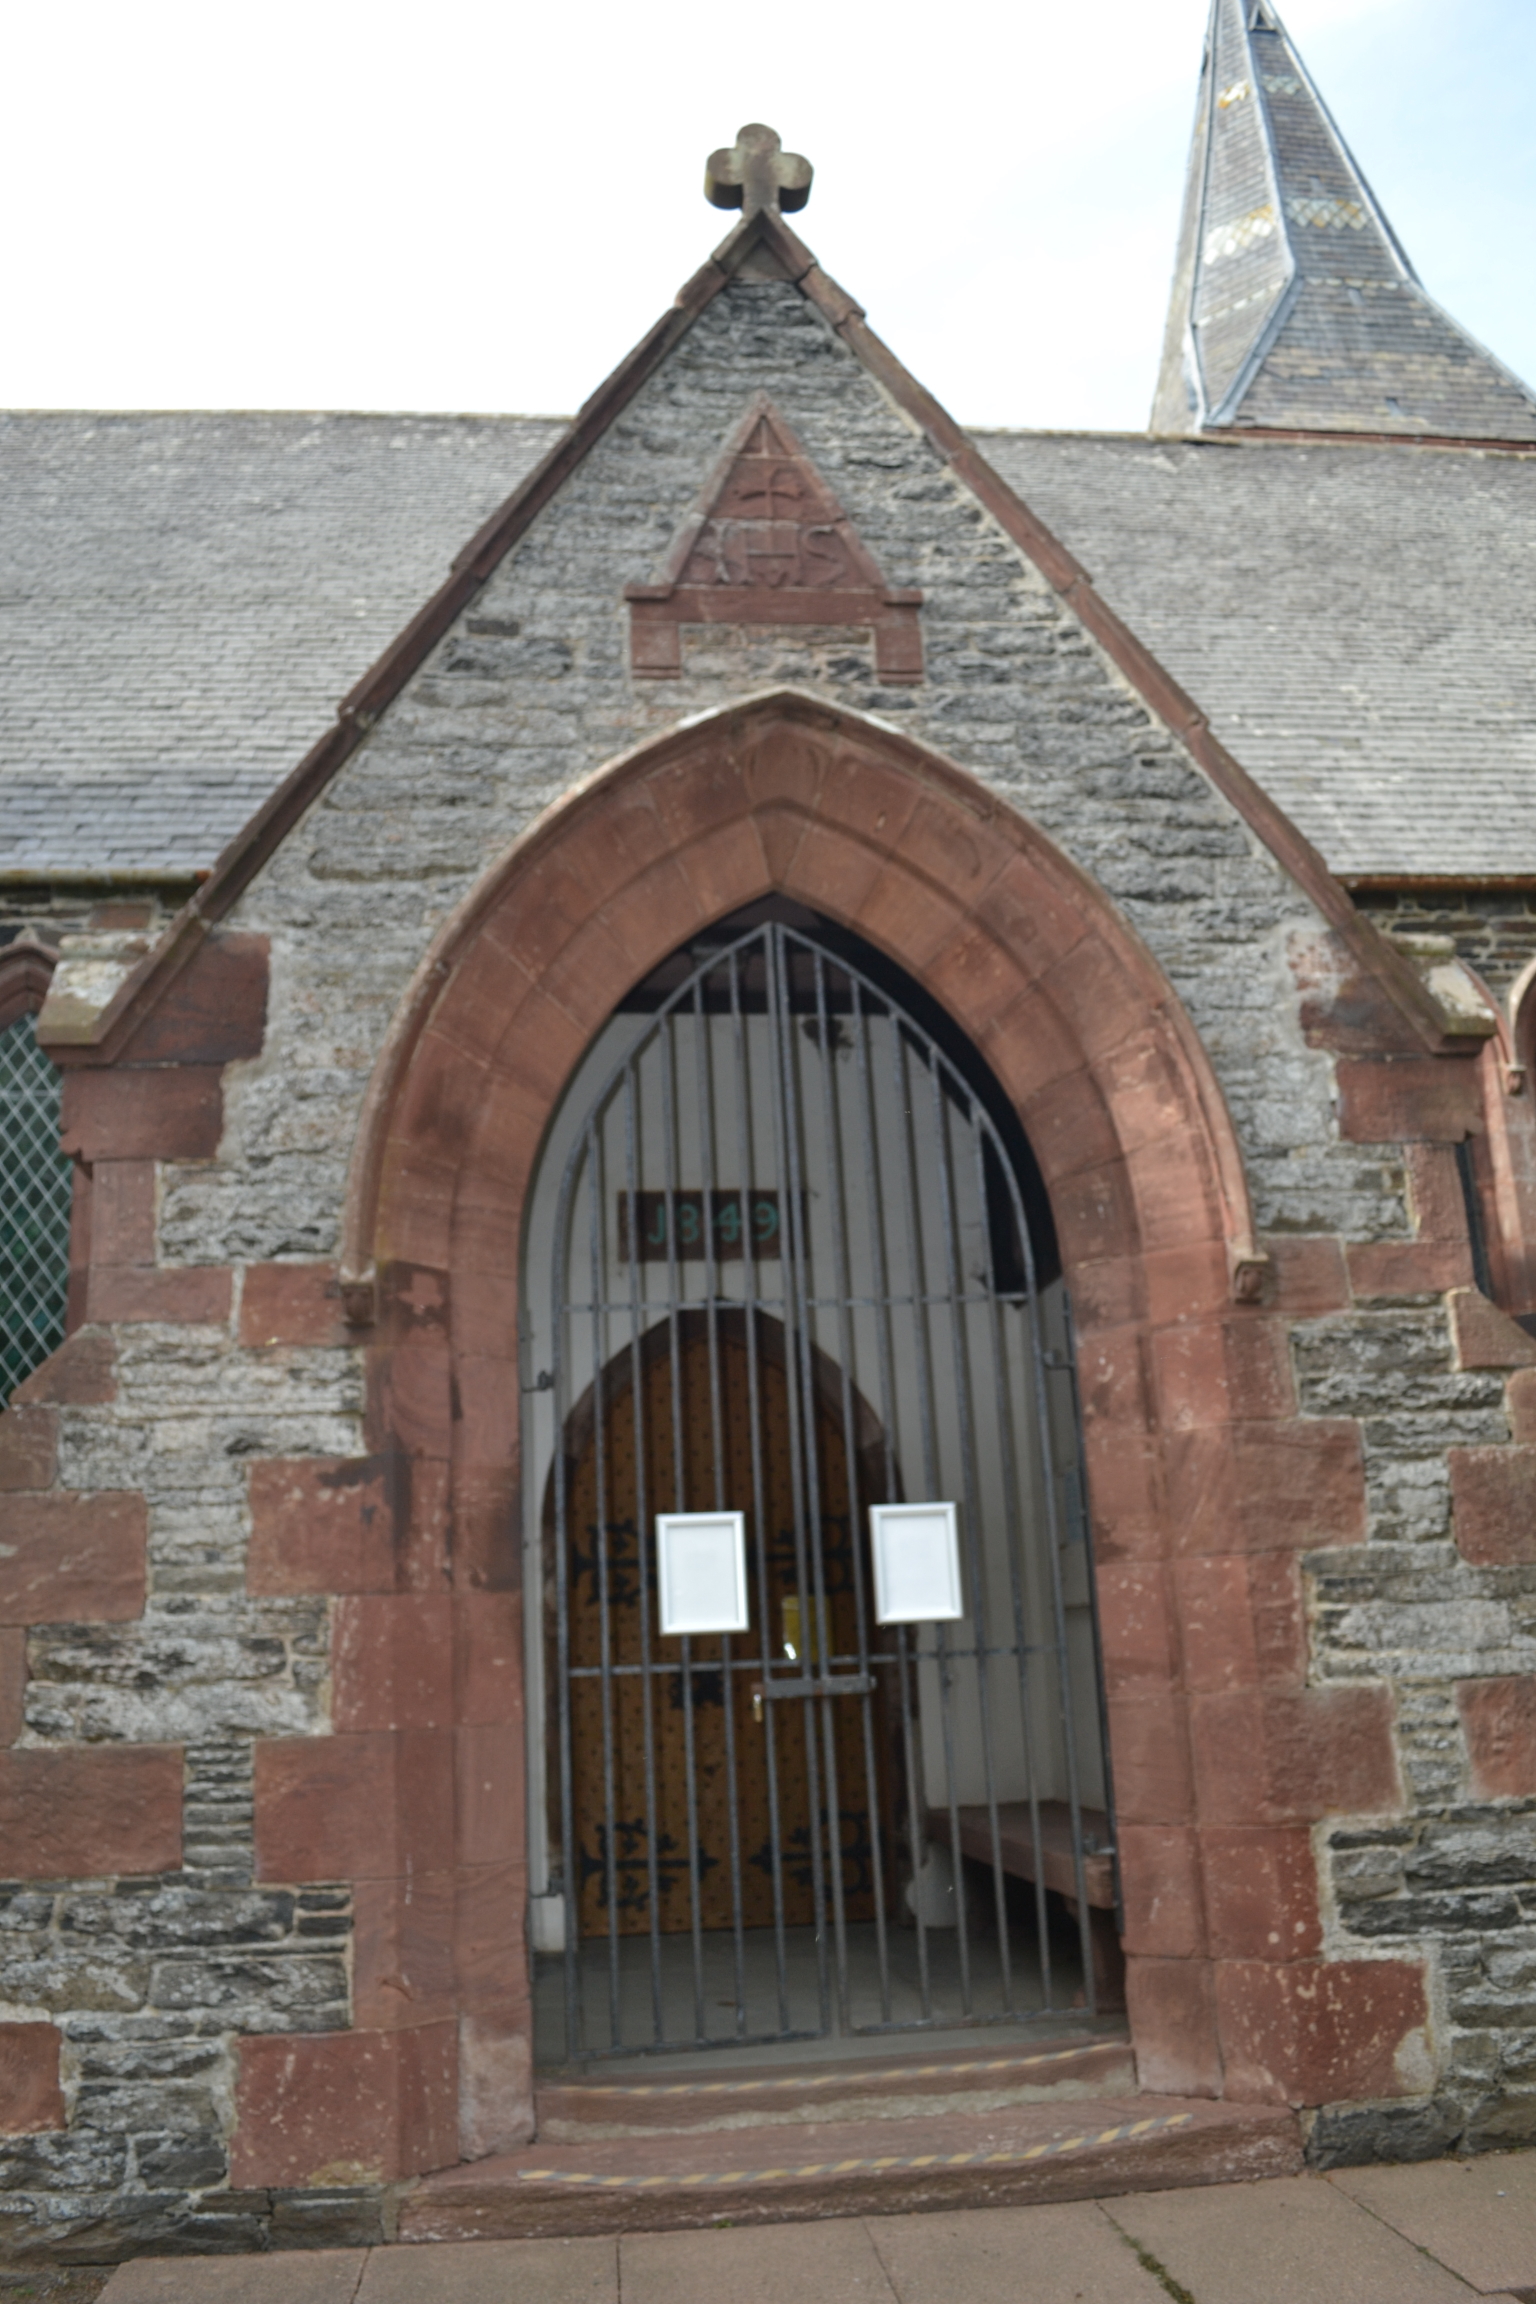 The stone set above the entrance porch of Woodhead Episcopal Church.